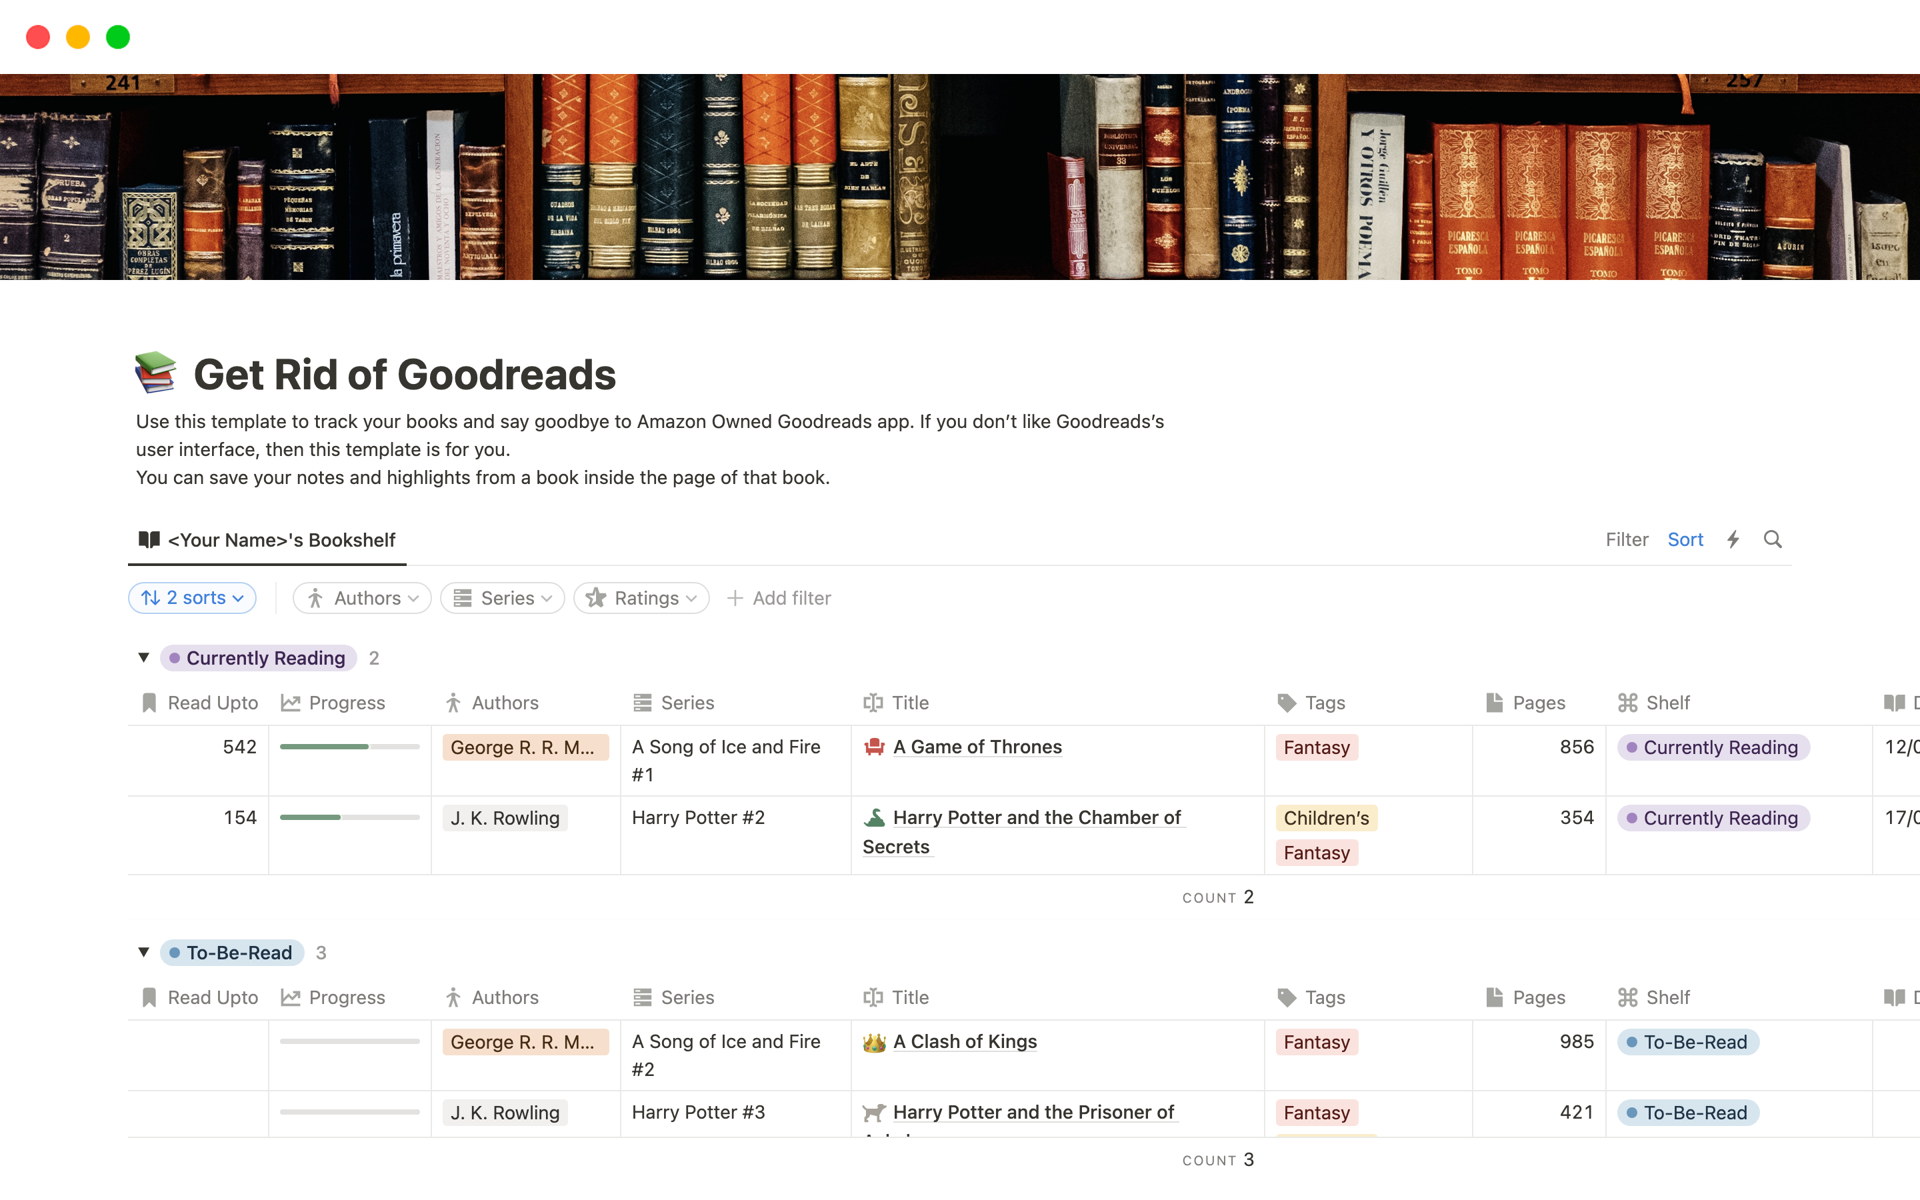 This template will help you track all the books you read just like goodreads.